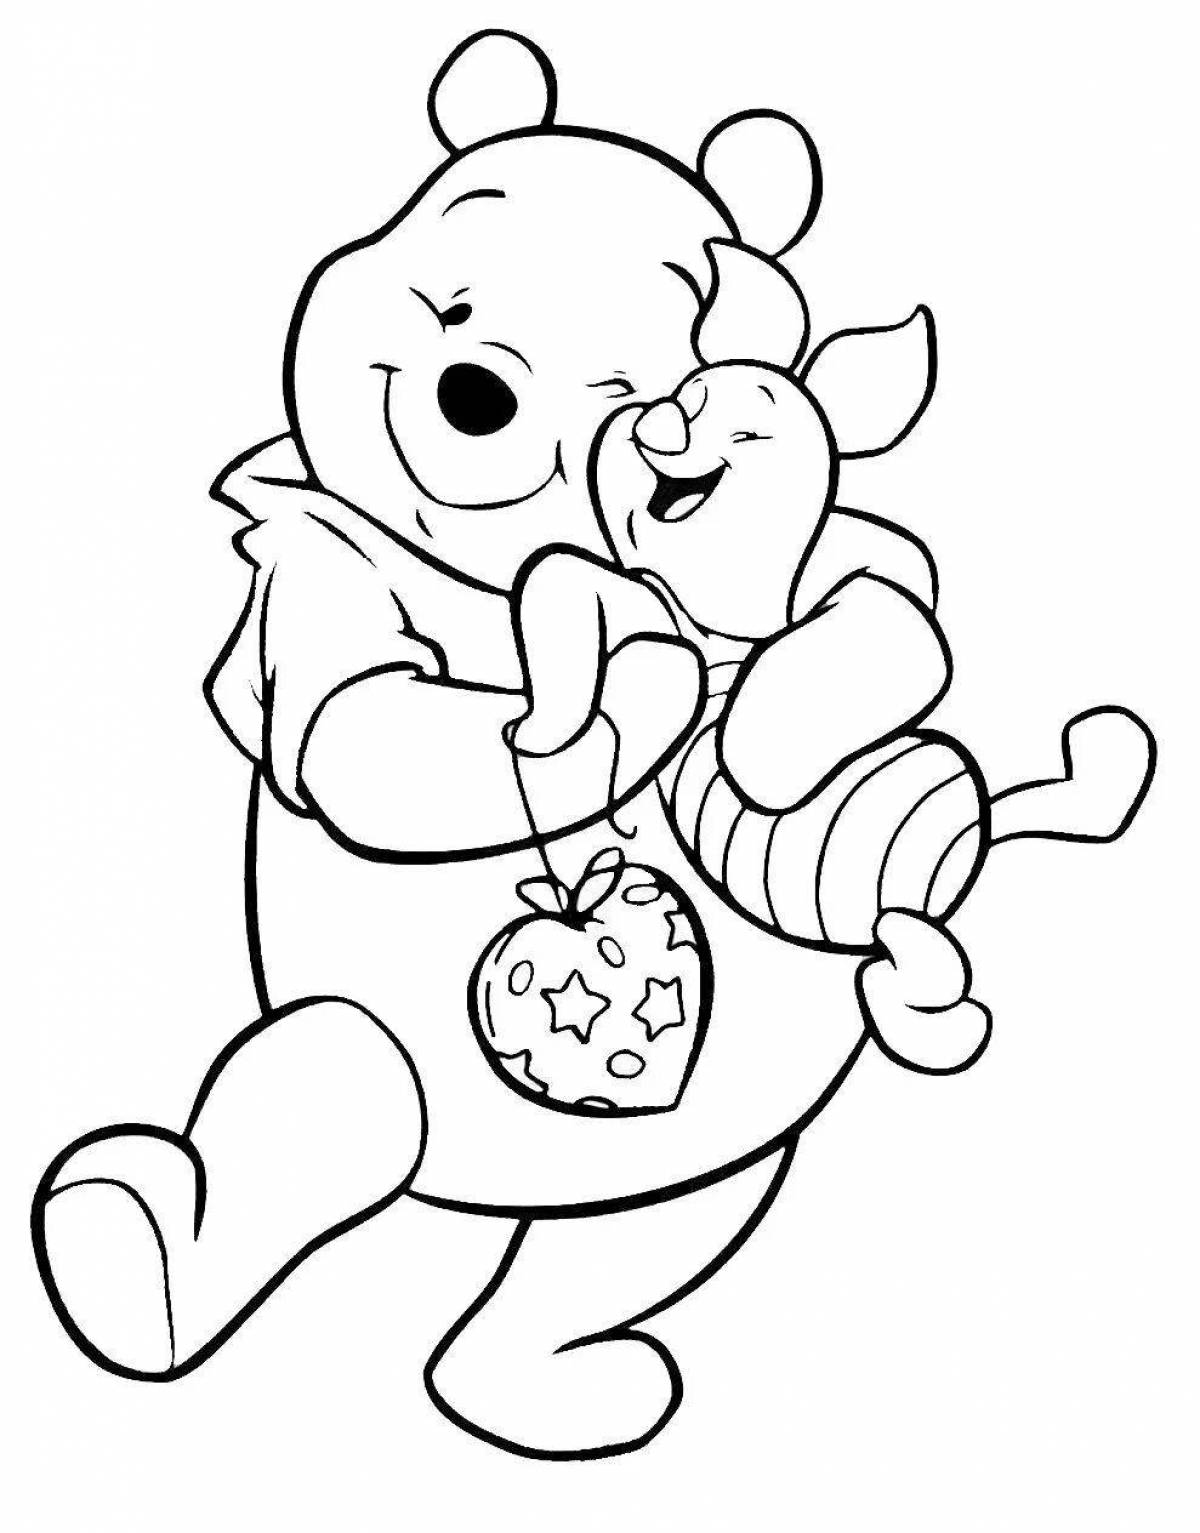 Winnie the Pooh coloring book for kids